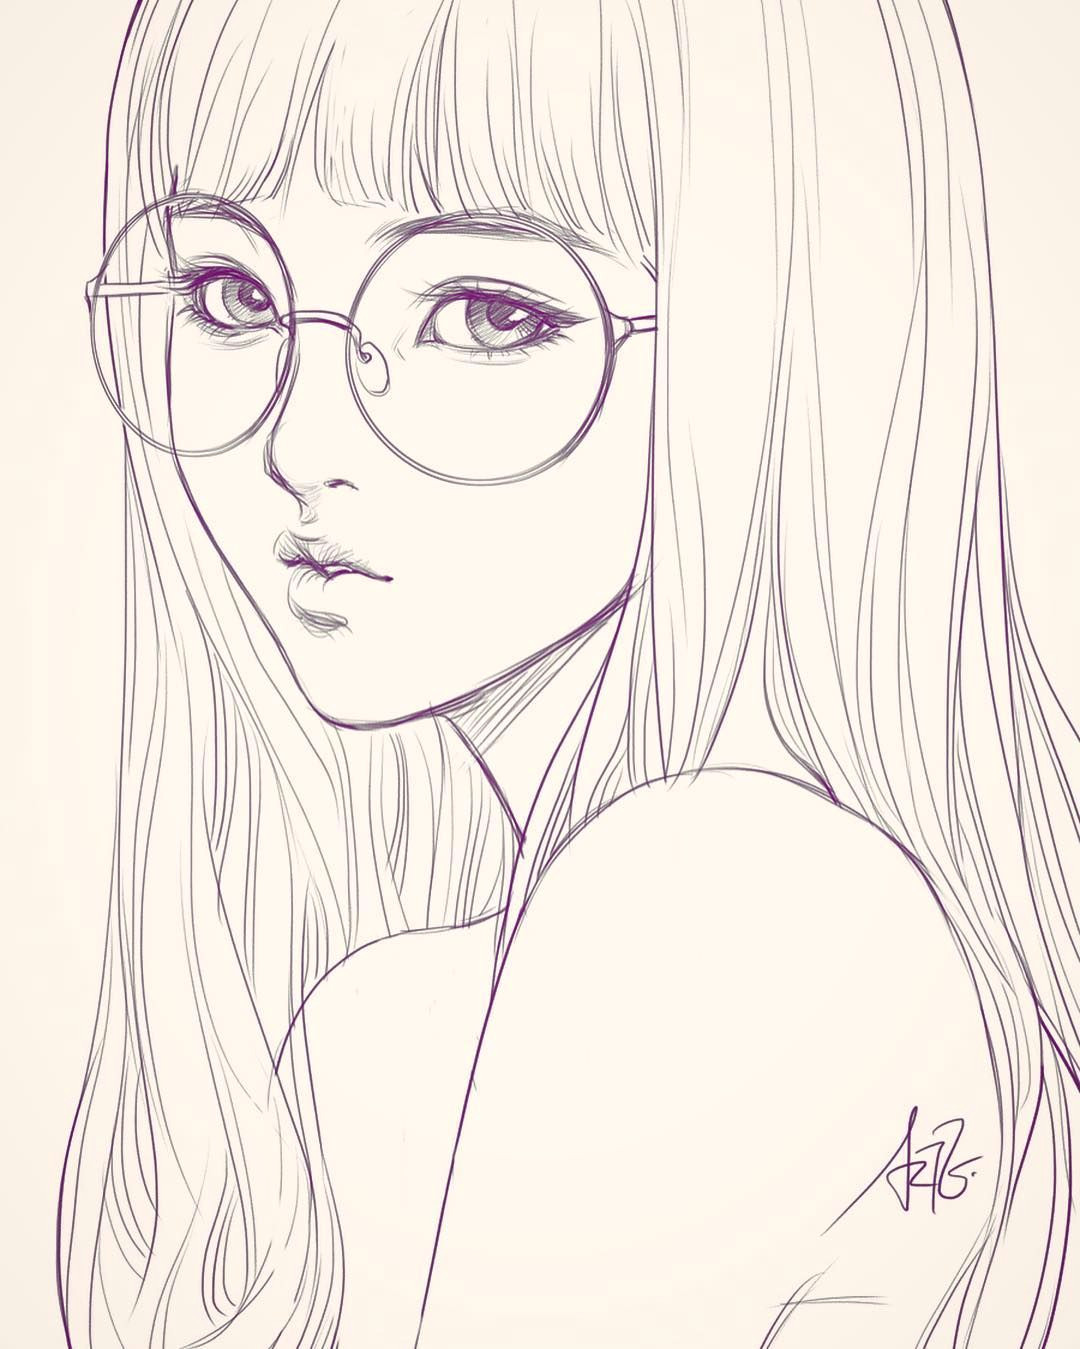 Drawing Of Girl Playing Last Sketch Of Girl with Glasses Having Bad Backache It Hurts